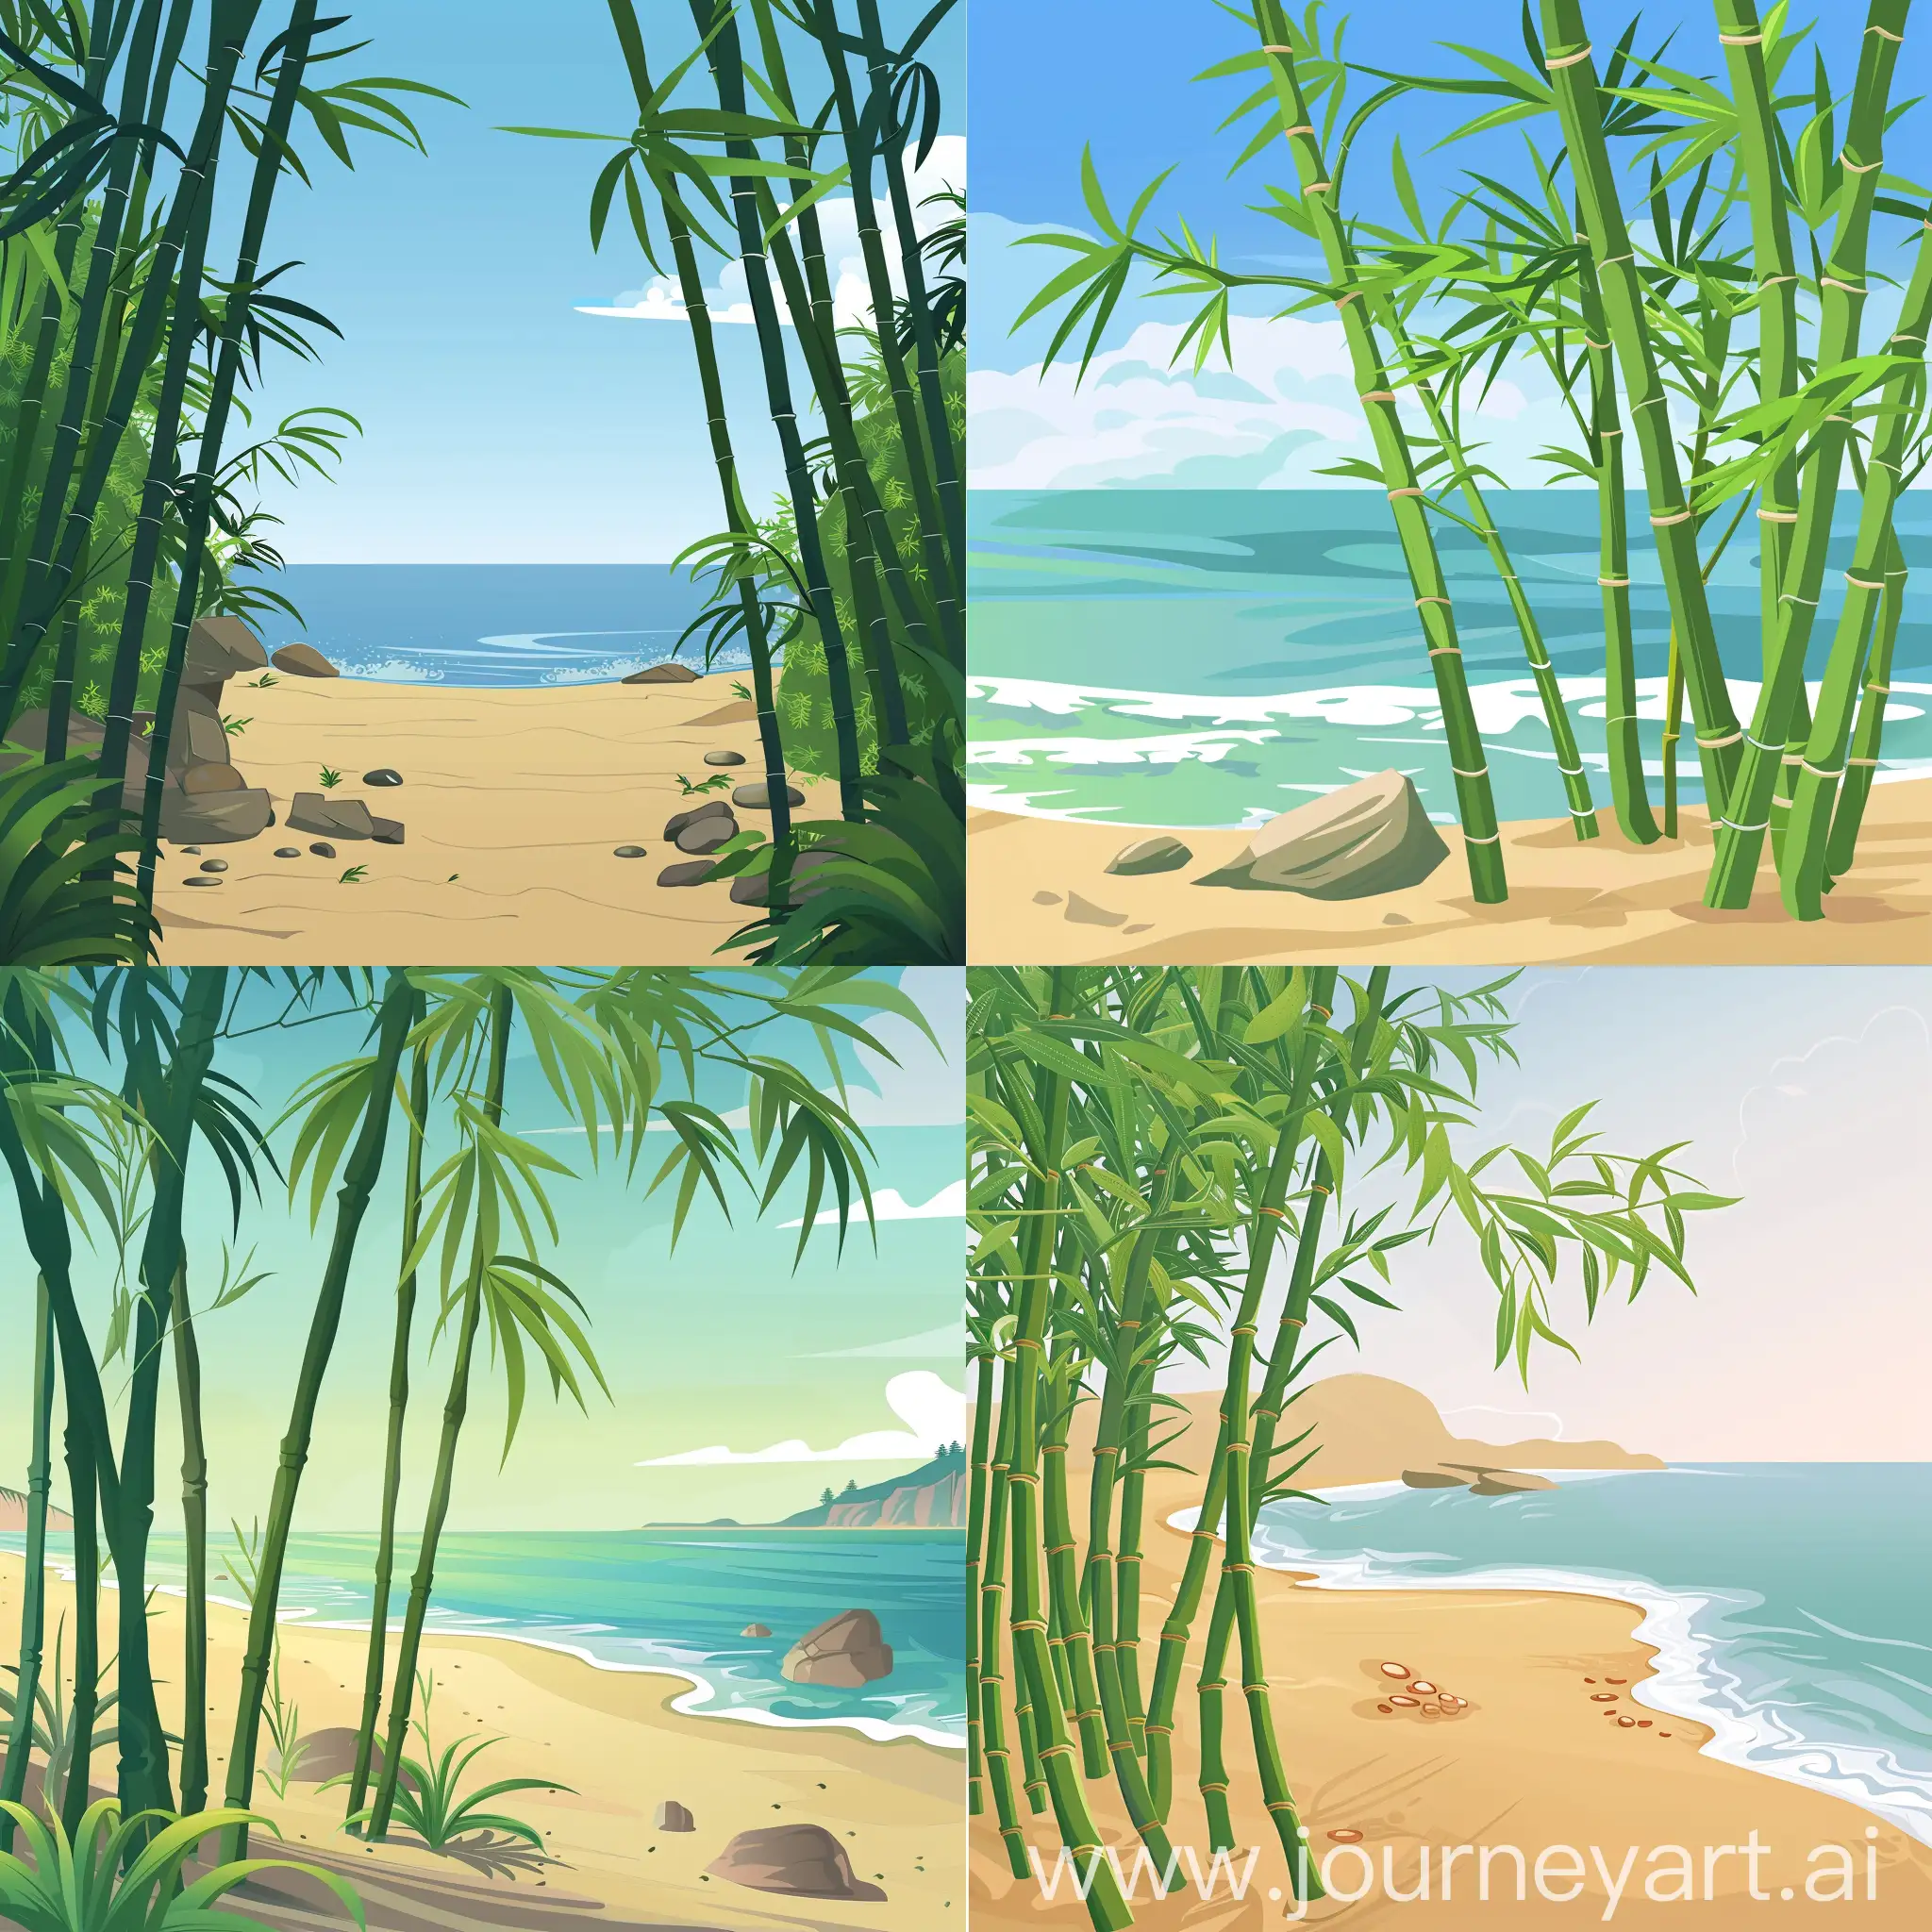 image of a seashore with bamboo trees cartoon style storybook